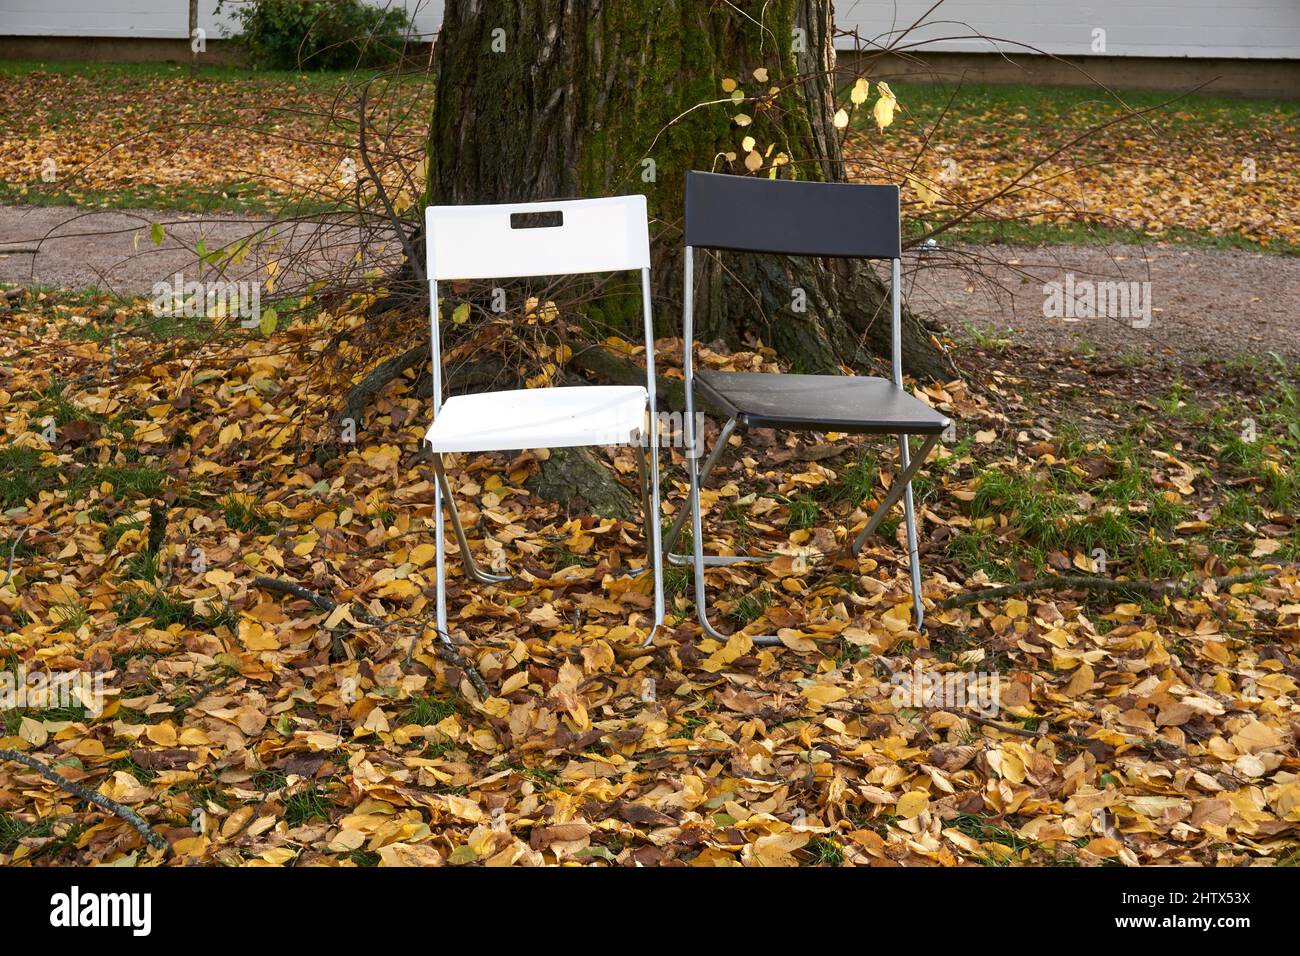 A black chair and a white chair sitting side by side outdoors Stock Photo